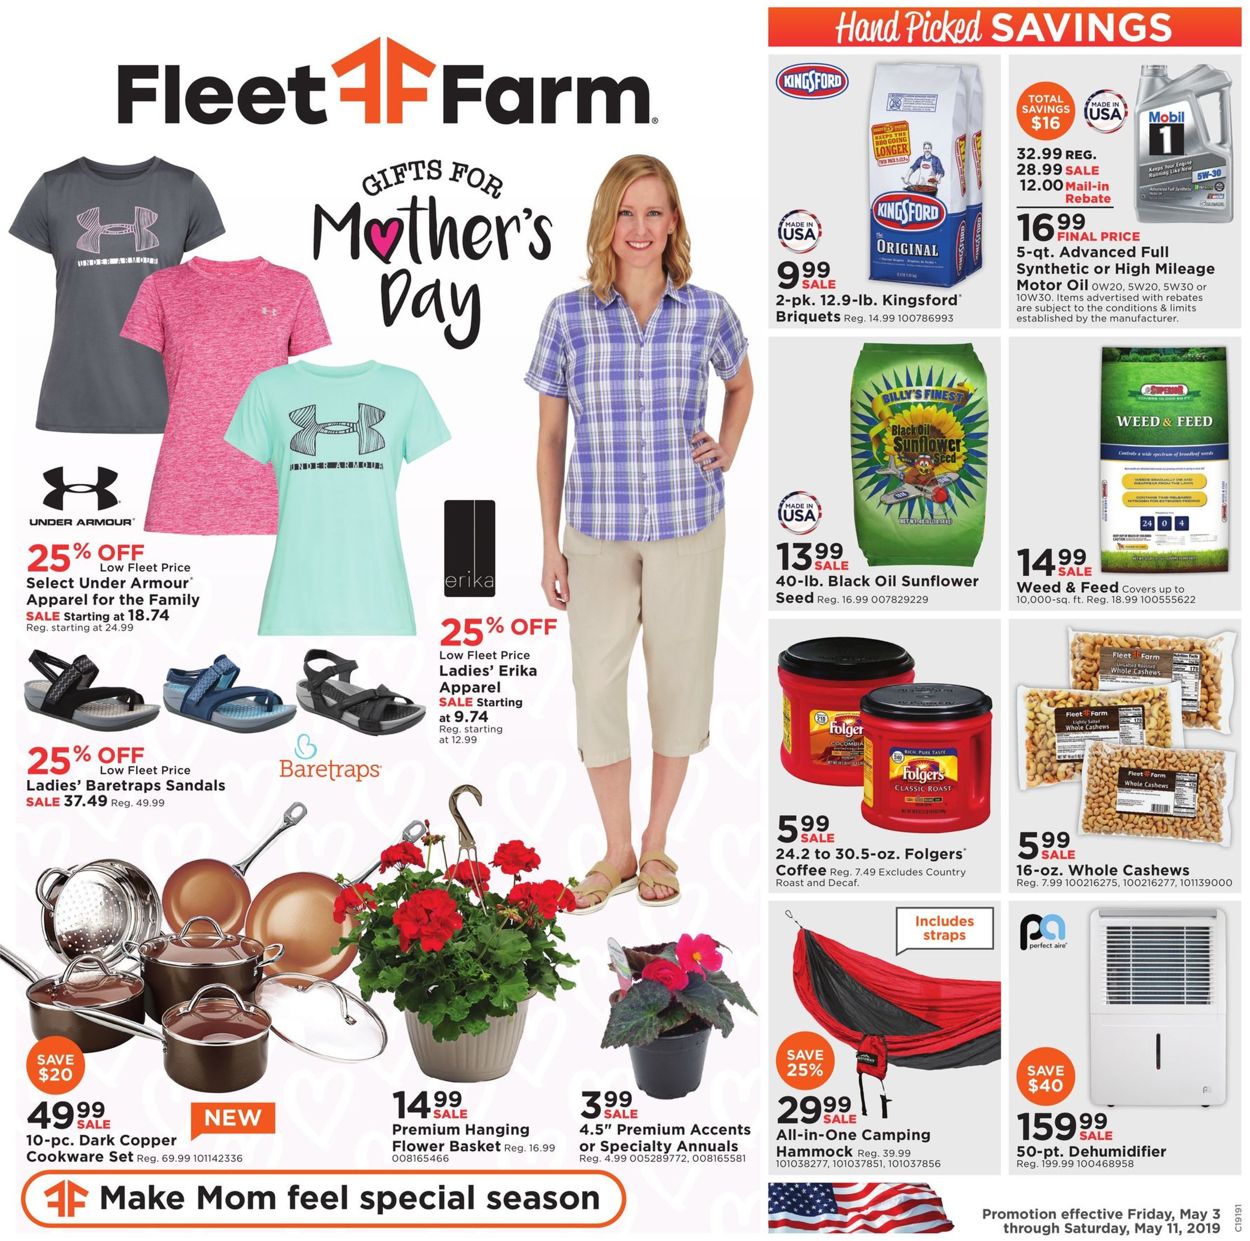 golden farms weekly ads